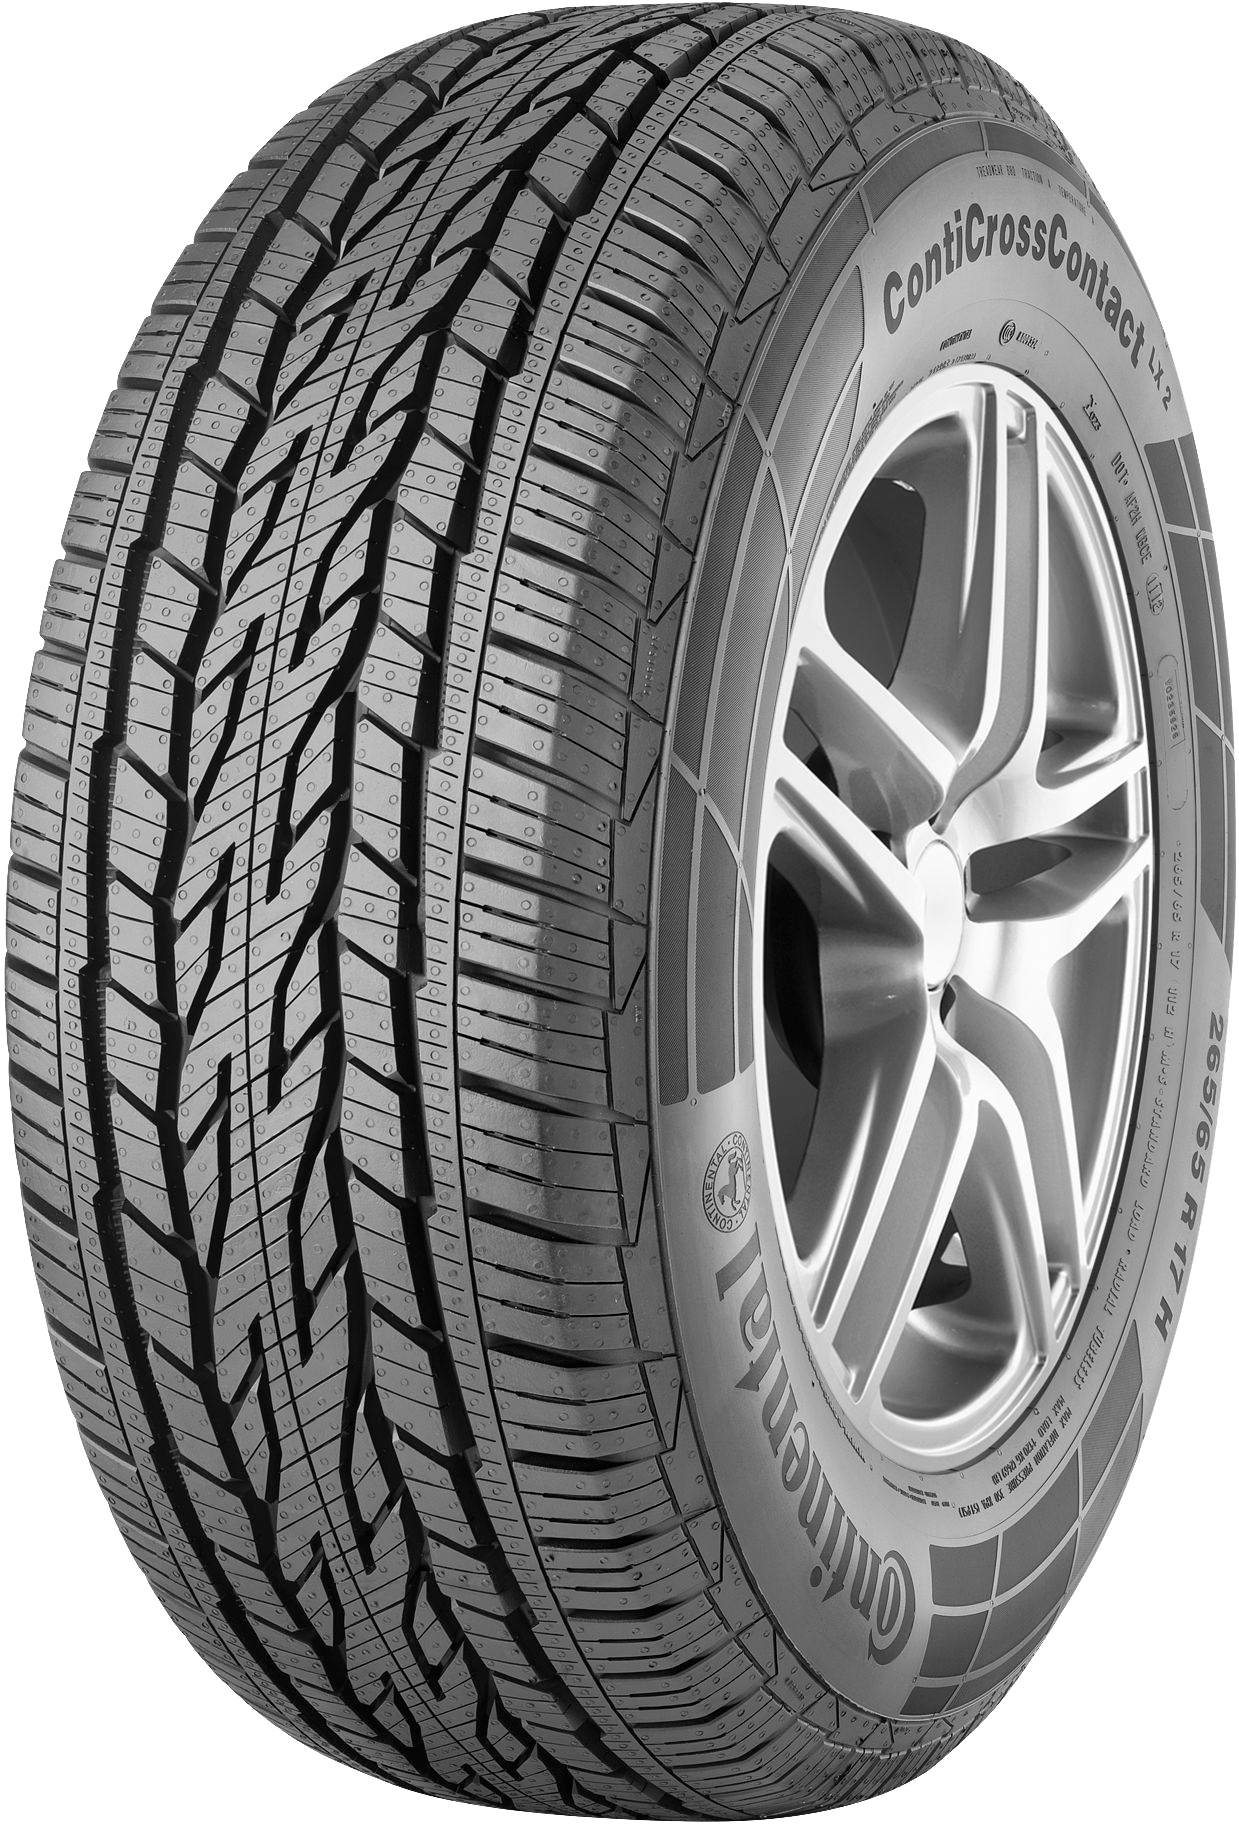 CONTINENTAL ContiCrossContact LX2 205/70 R15 96H